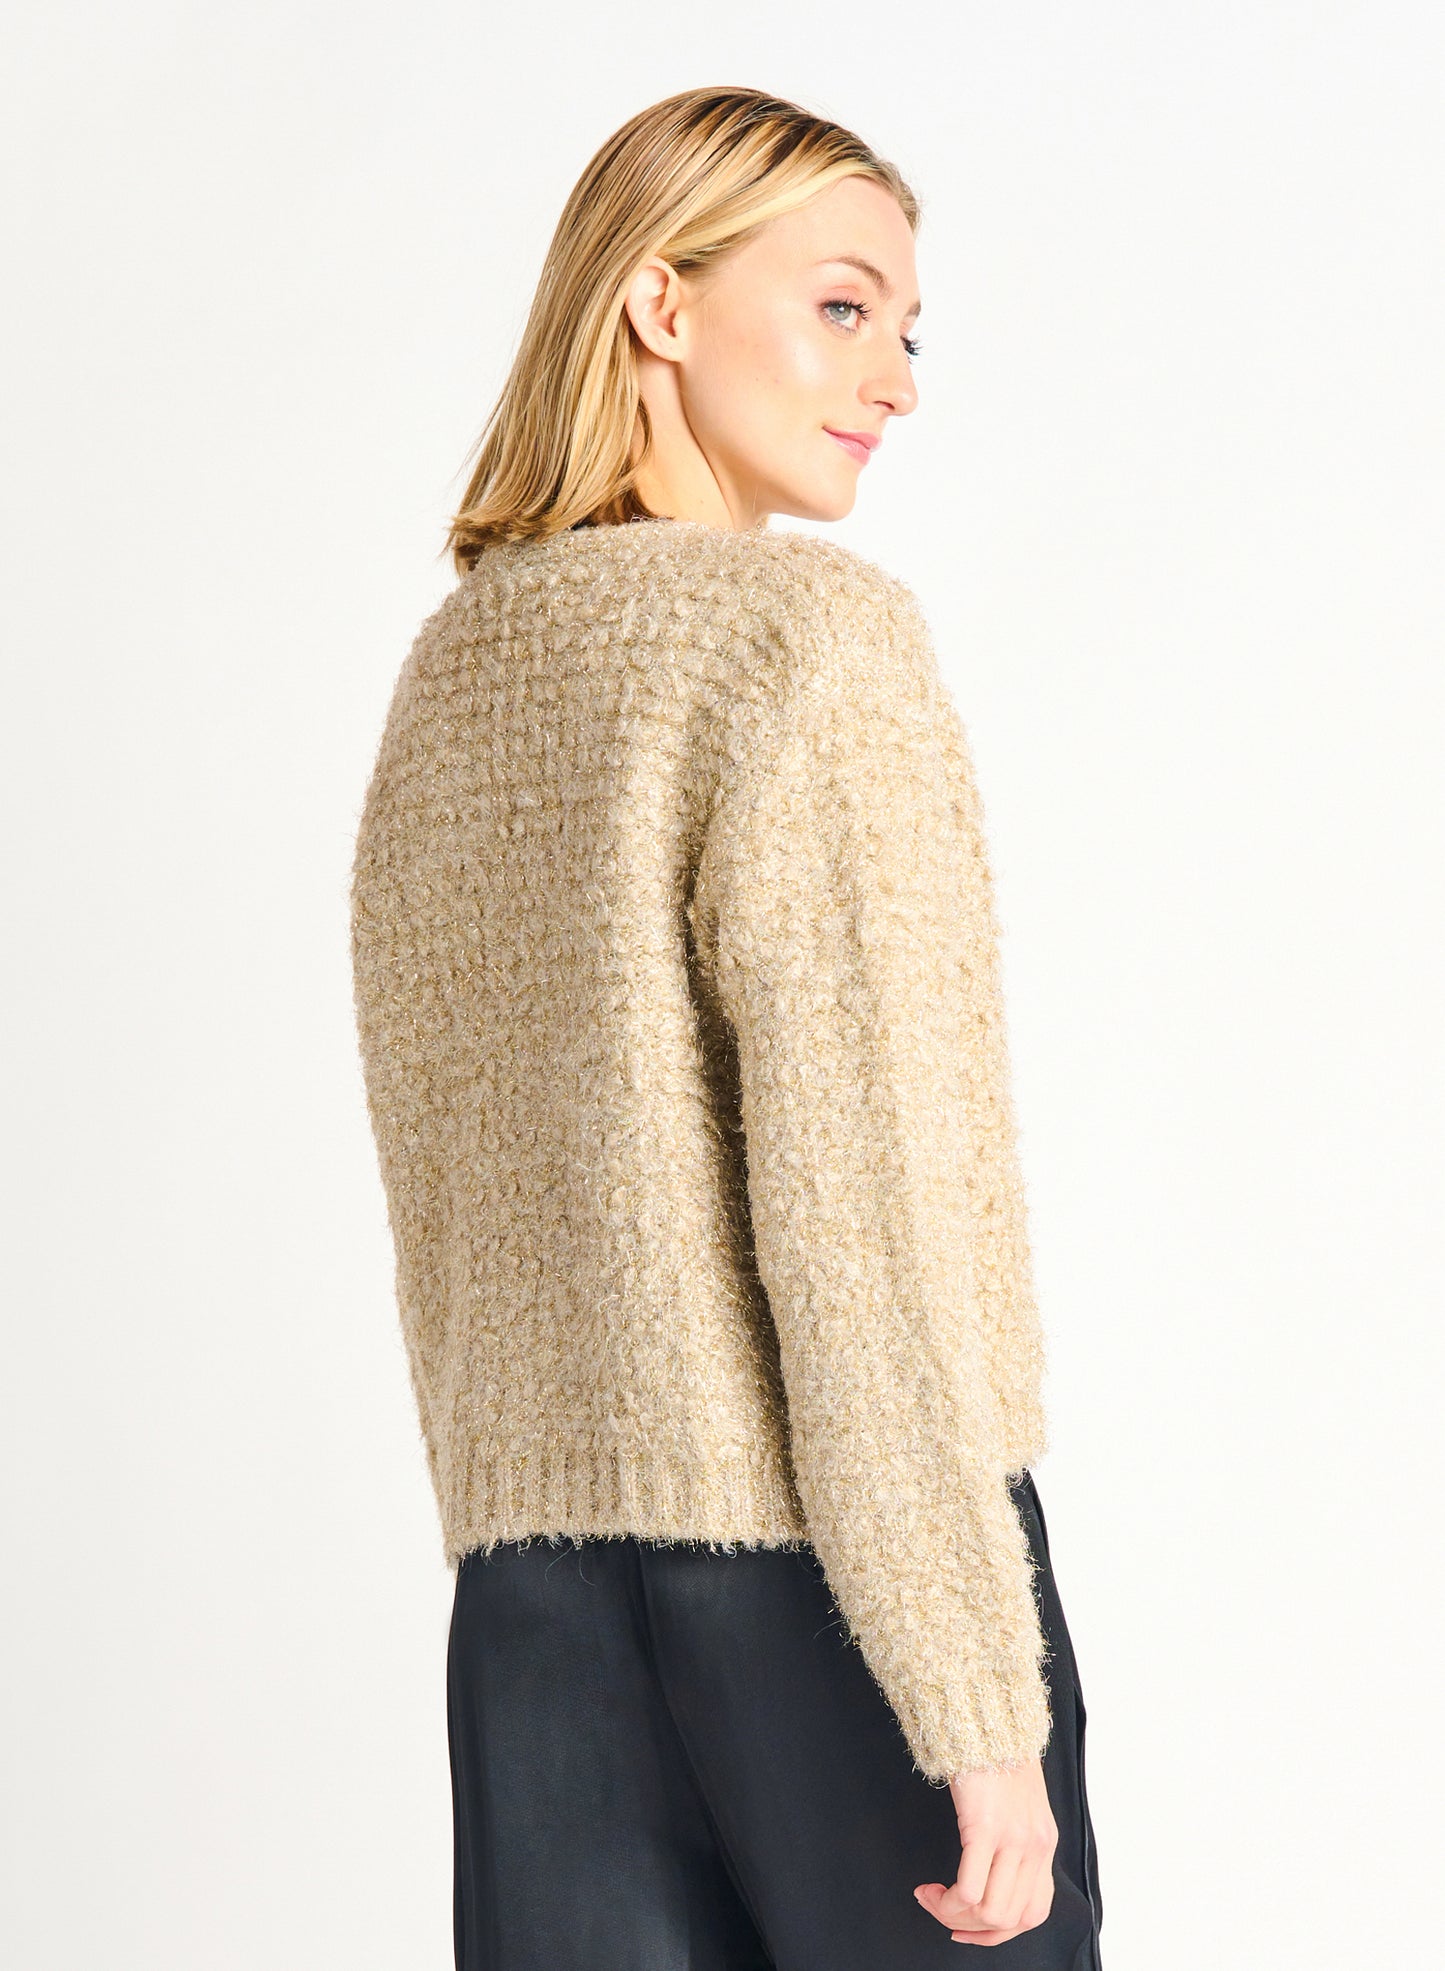 A Touch Of Sparkle Sweater